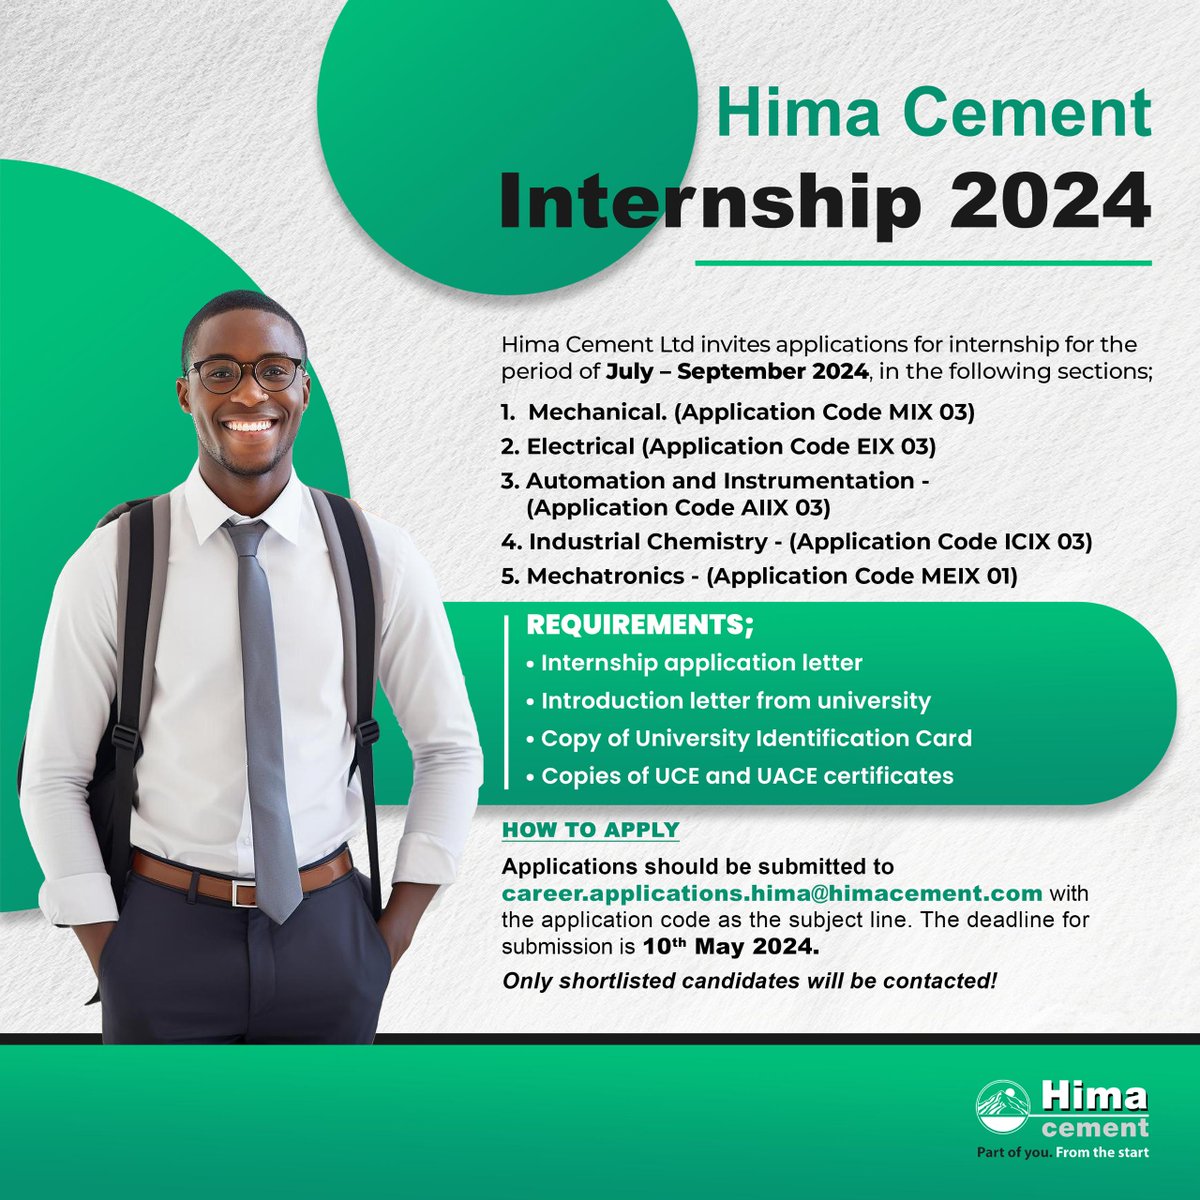 Internship Opportunities Available for 2024! 

Apply now by emailing career.applications.hima@himacement.com with the application code as the subject line. 

Deadline: May 10th, 2024. Don't miss out! 
#HimaCement #Internship #ApplyNow